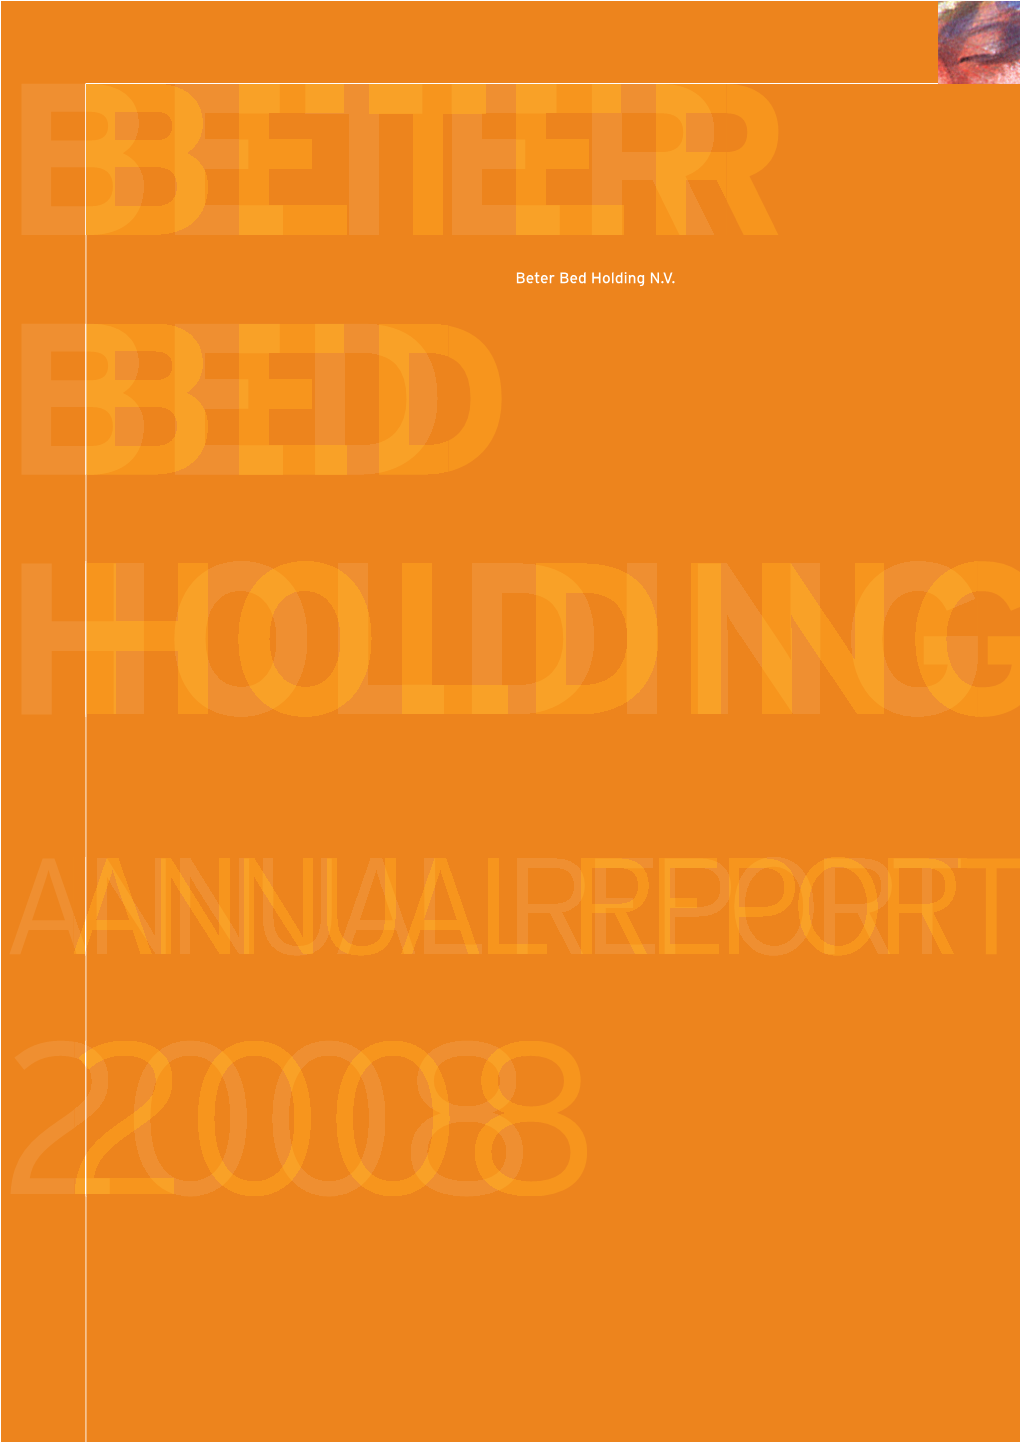 Annual Report 2008 2 Beter Bed Holding Annual Report 2008 Contents